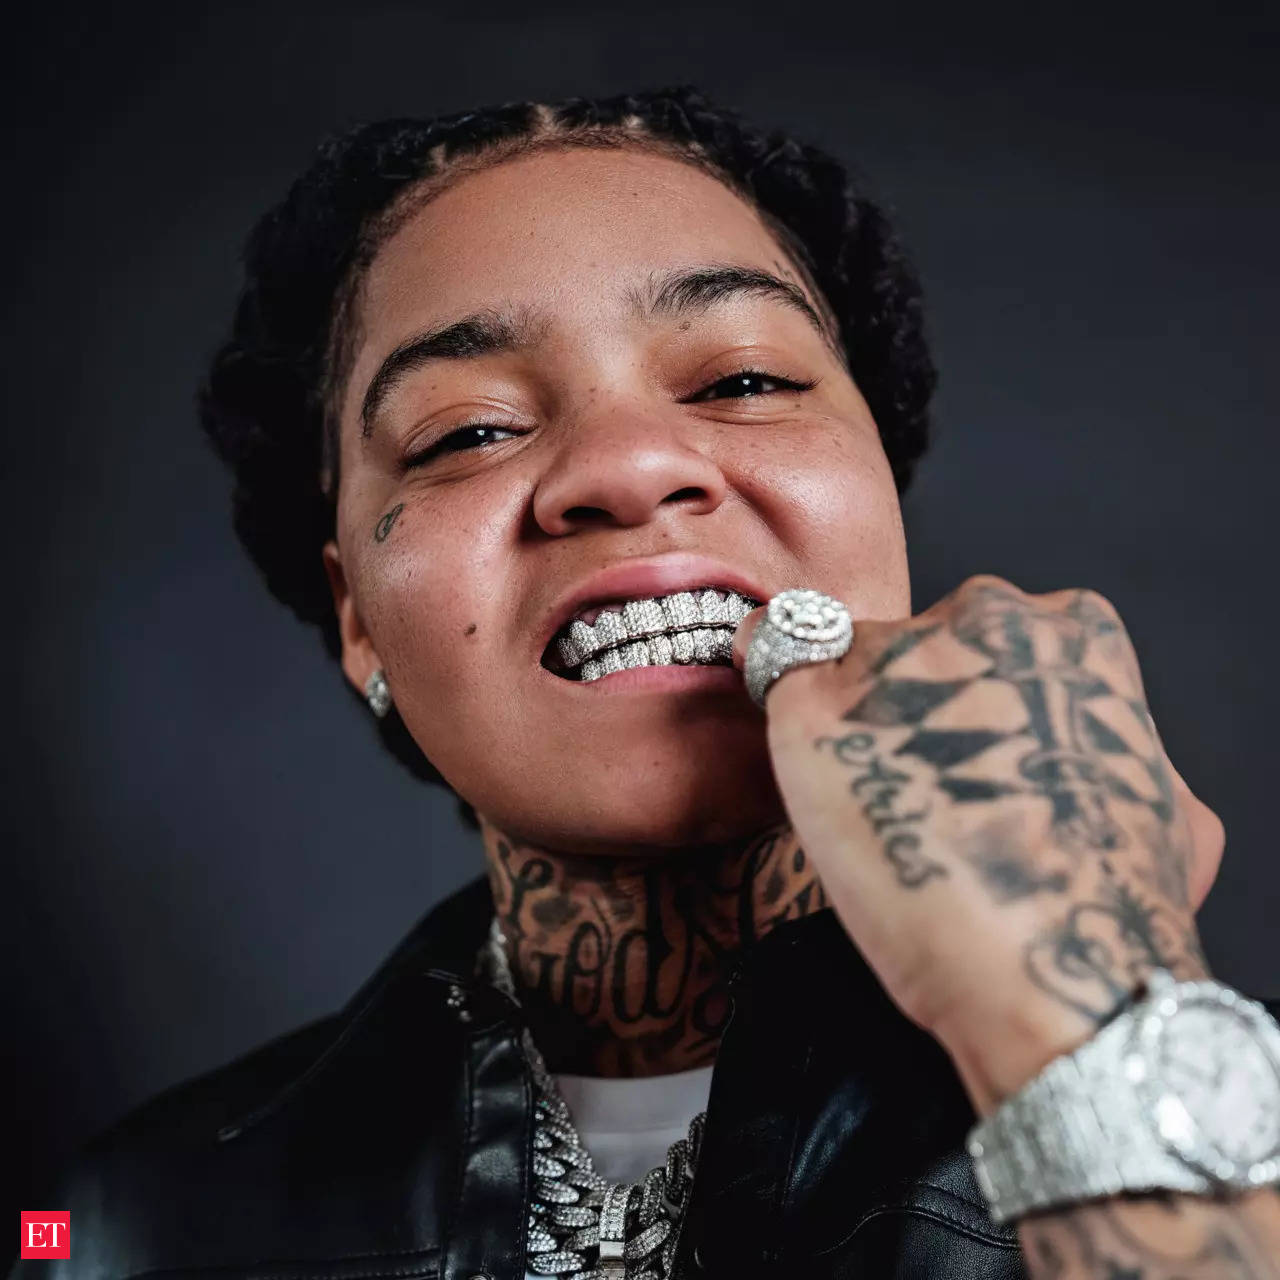 Girl Girl Rep X Video - Young MA: Is rapper Young M.A. expecting a child? Here's what we know - The  Economic Times